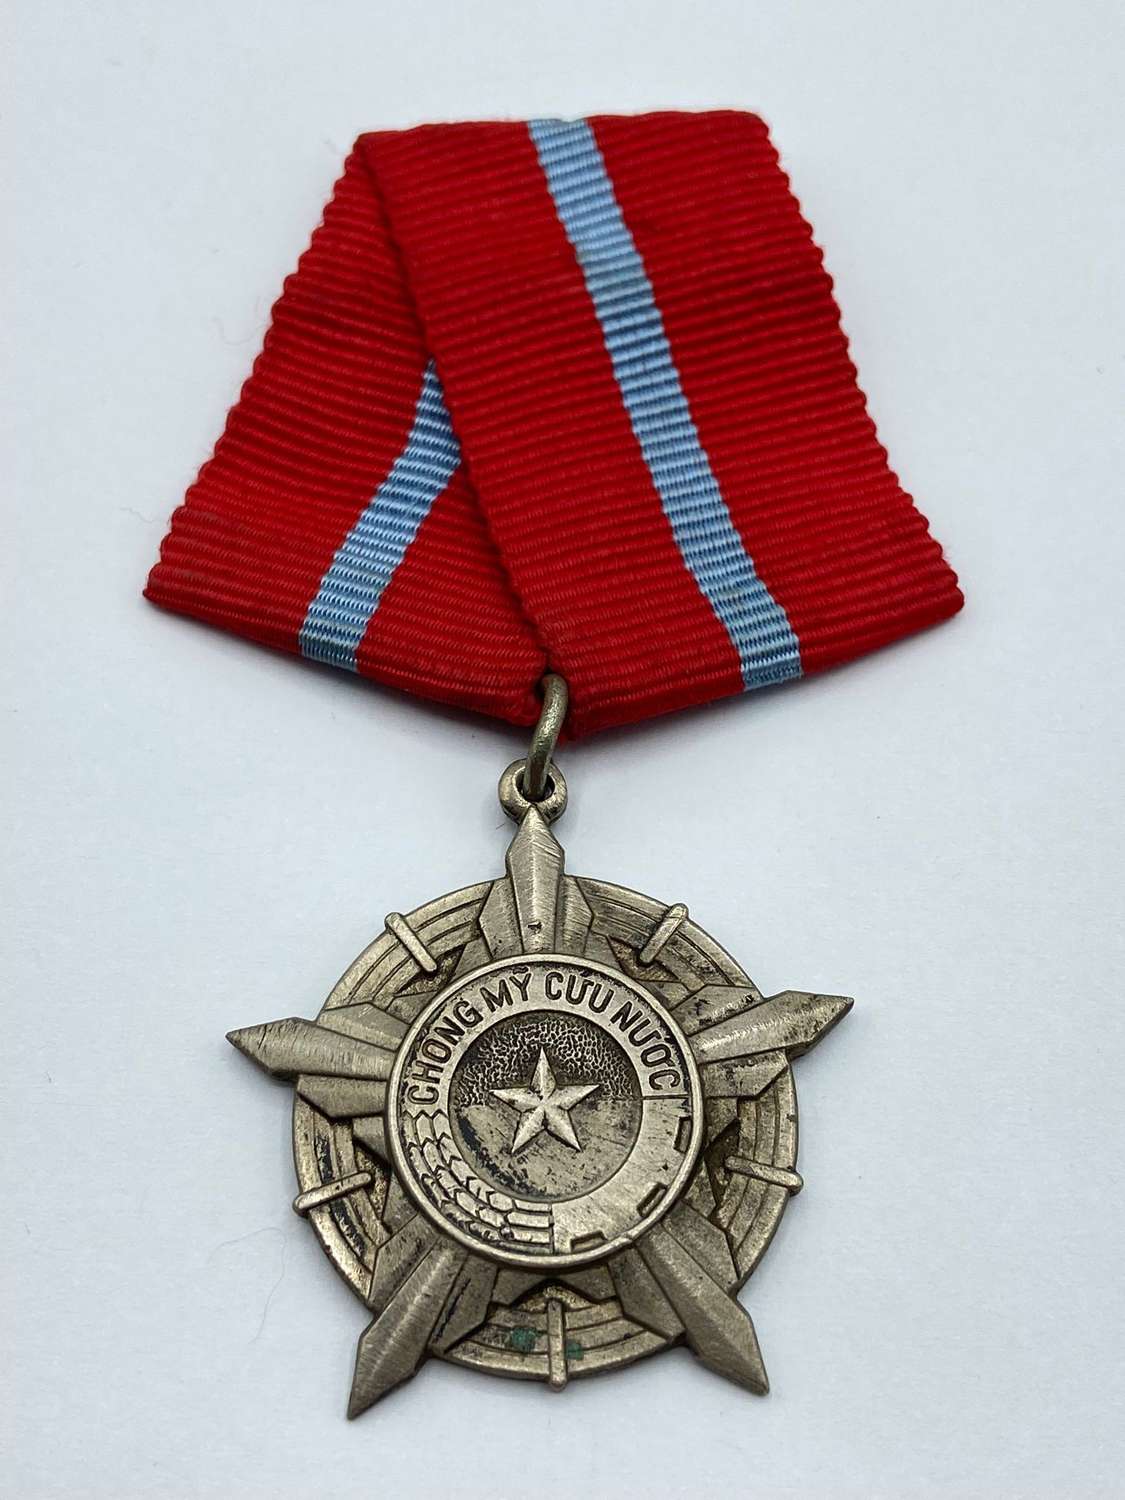 Post WW2 Liberation of South Vietnam Resolution for Victory Medal